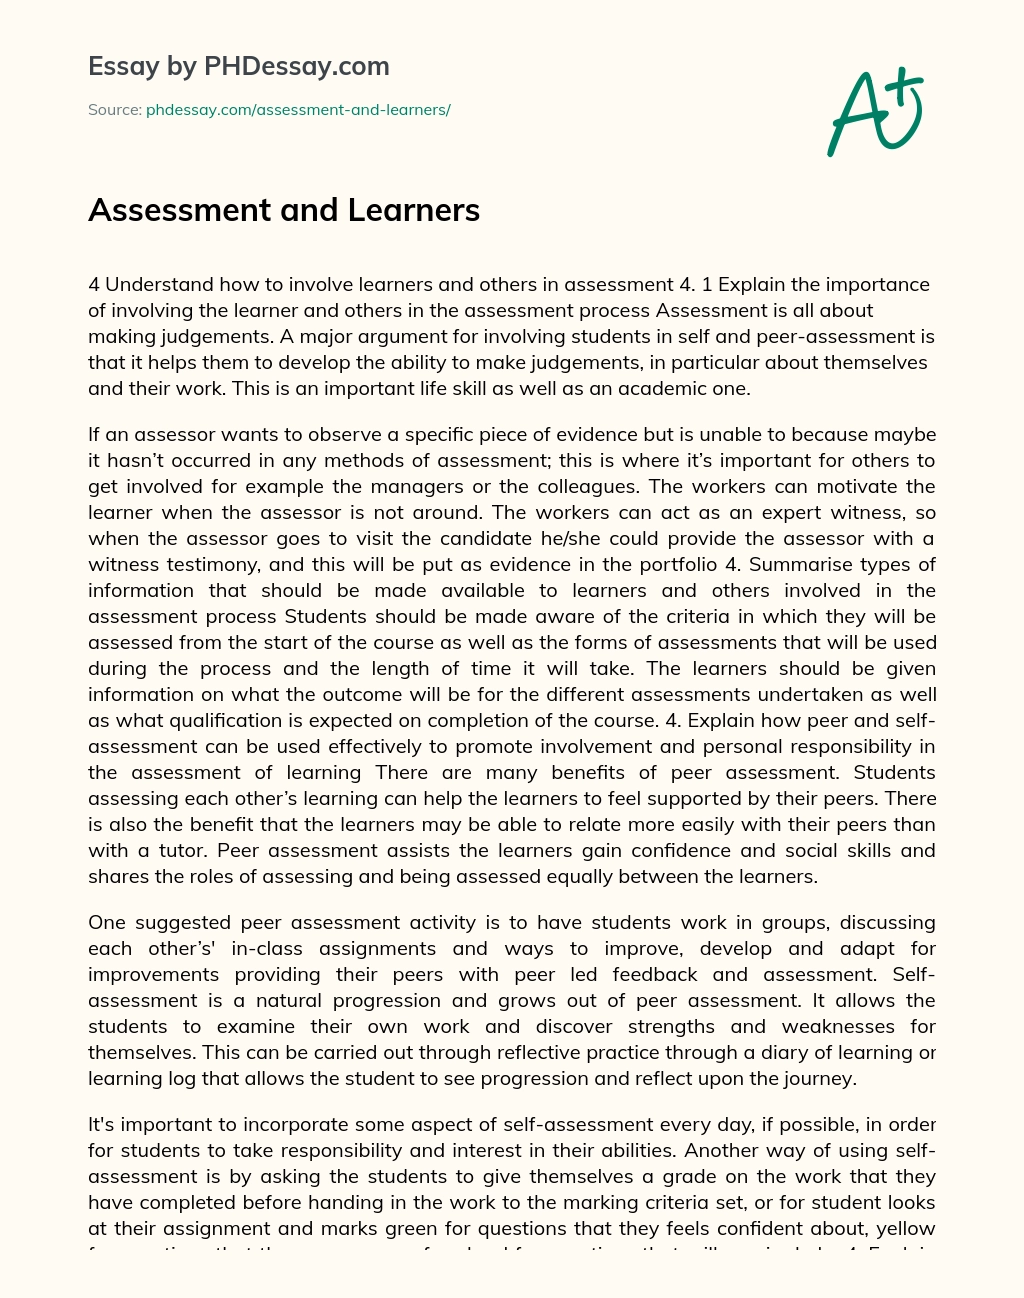 Assessment and Learners essay